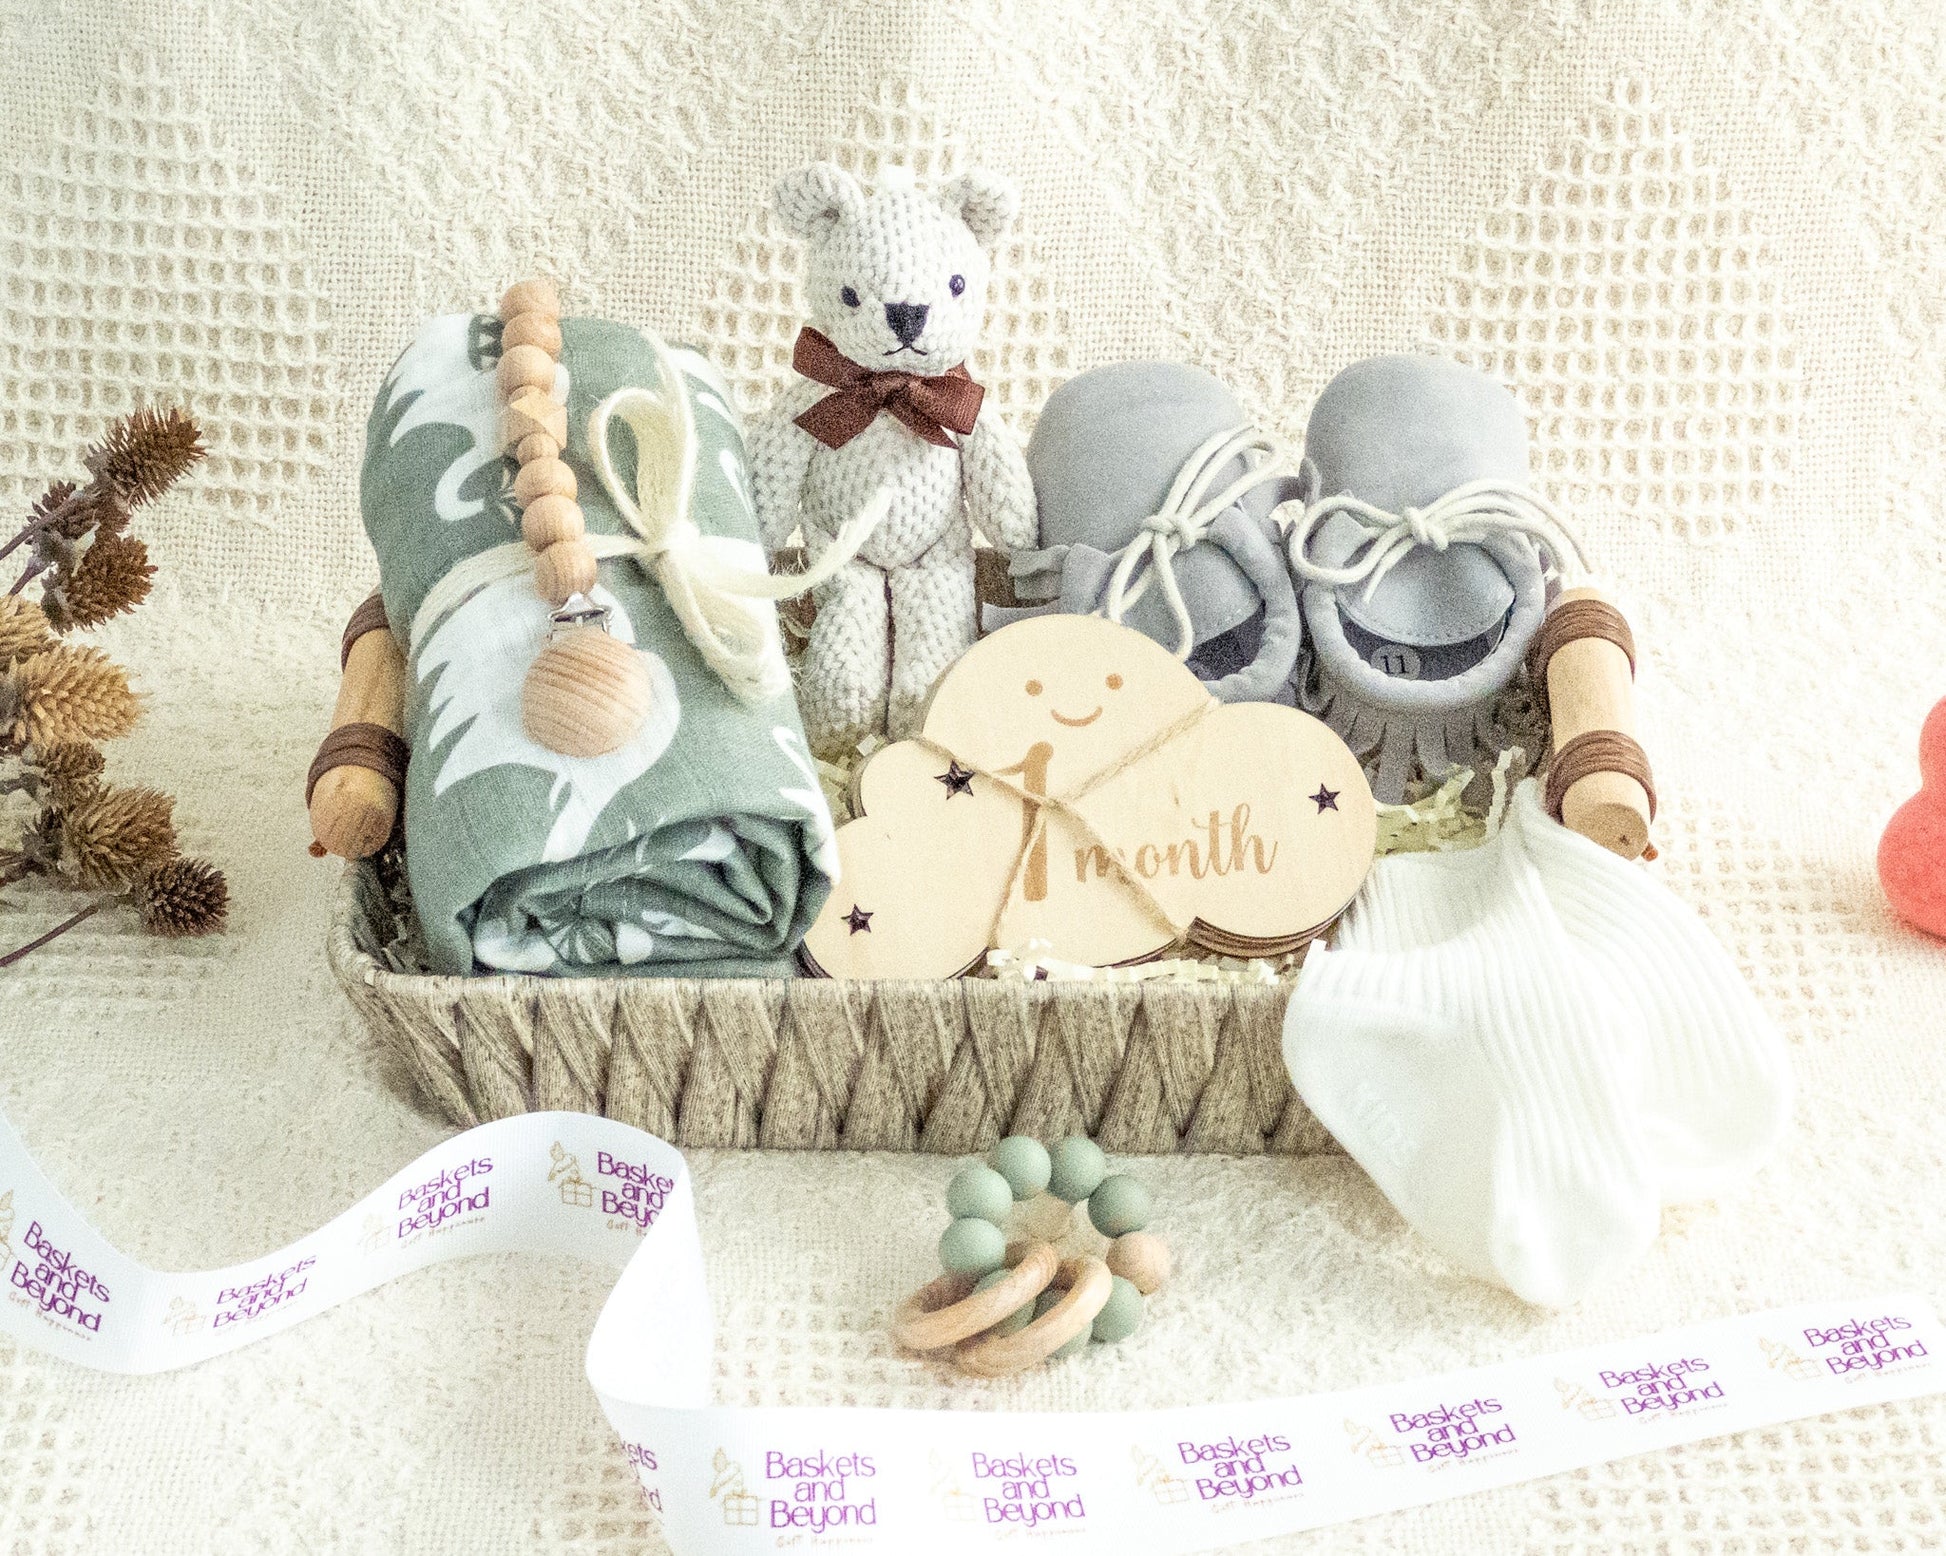 Welcome to the World - Baskets and Beyond